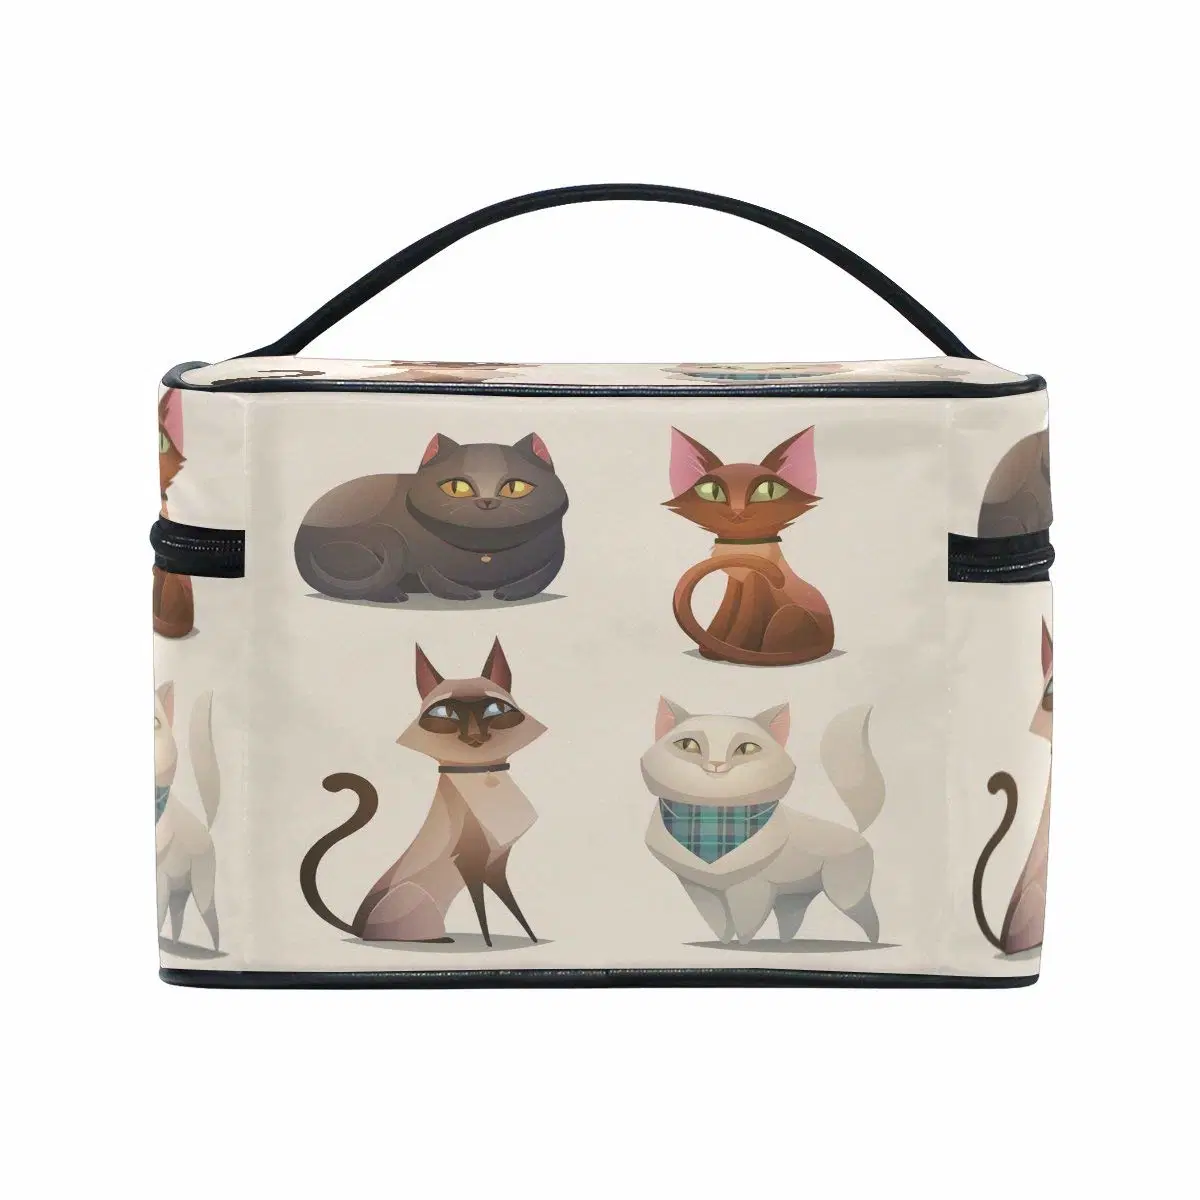 Travel Makeup Bags Four Cartoon Cat Cosmetic Bags Organizer Train Case Toiletry Make up Pouch Multicolor